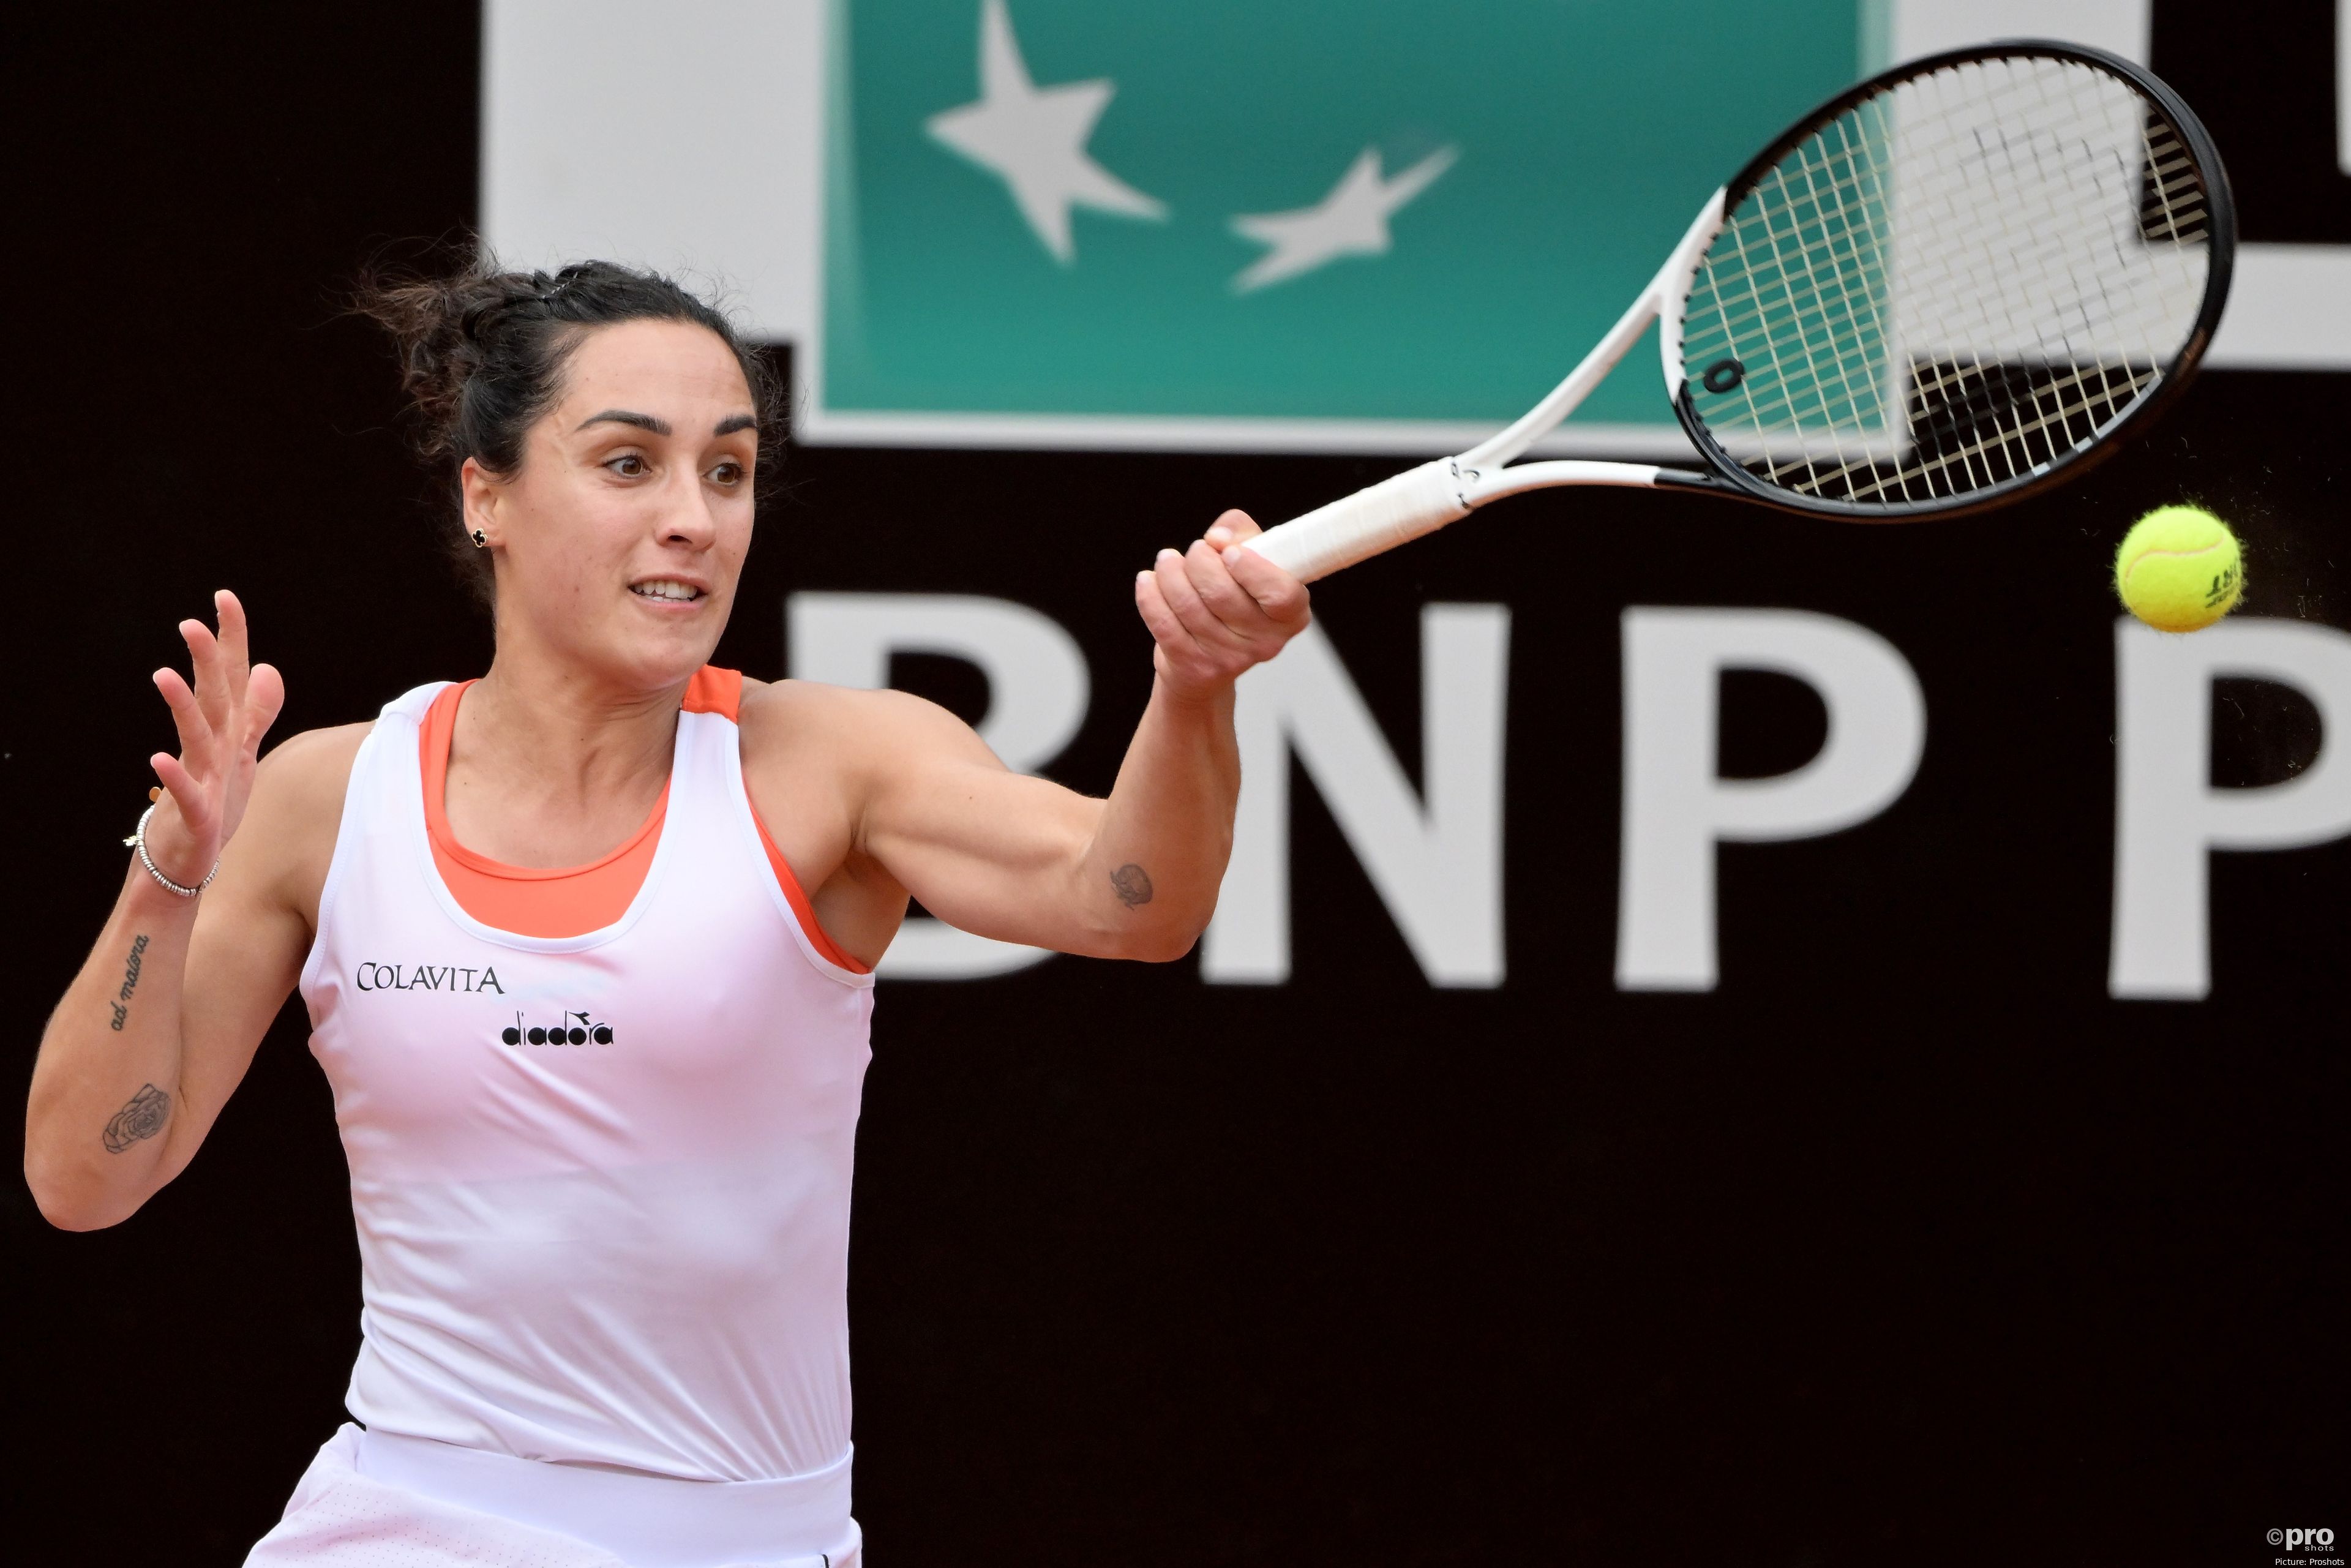 Trevisan won the title at 2022 Rabat Open after defeated Claire Liu (6-1, 6-2)